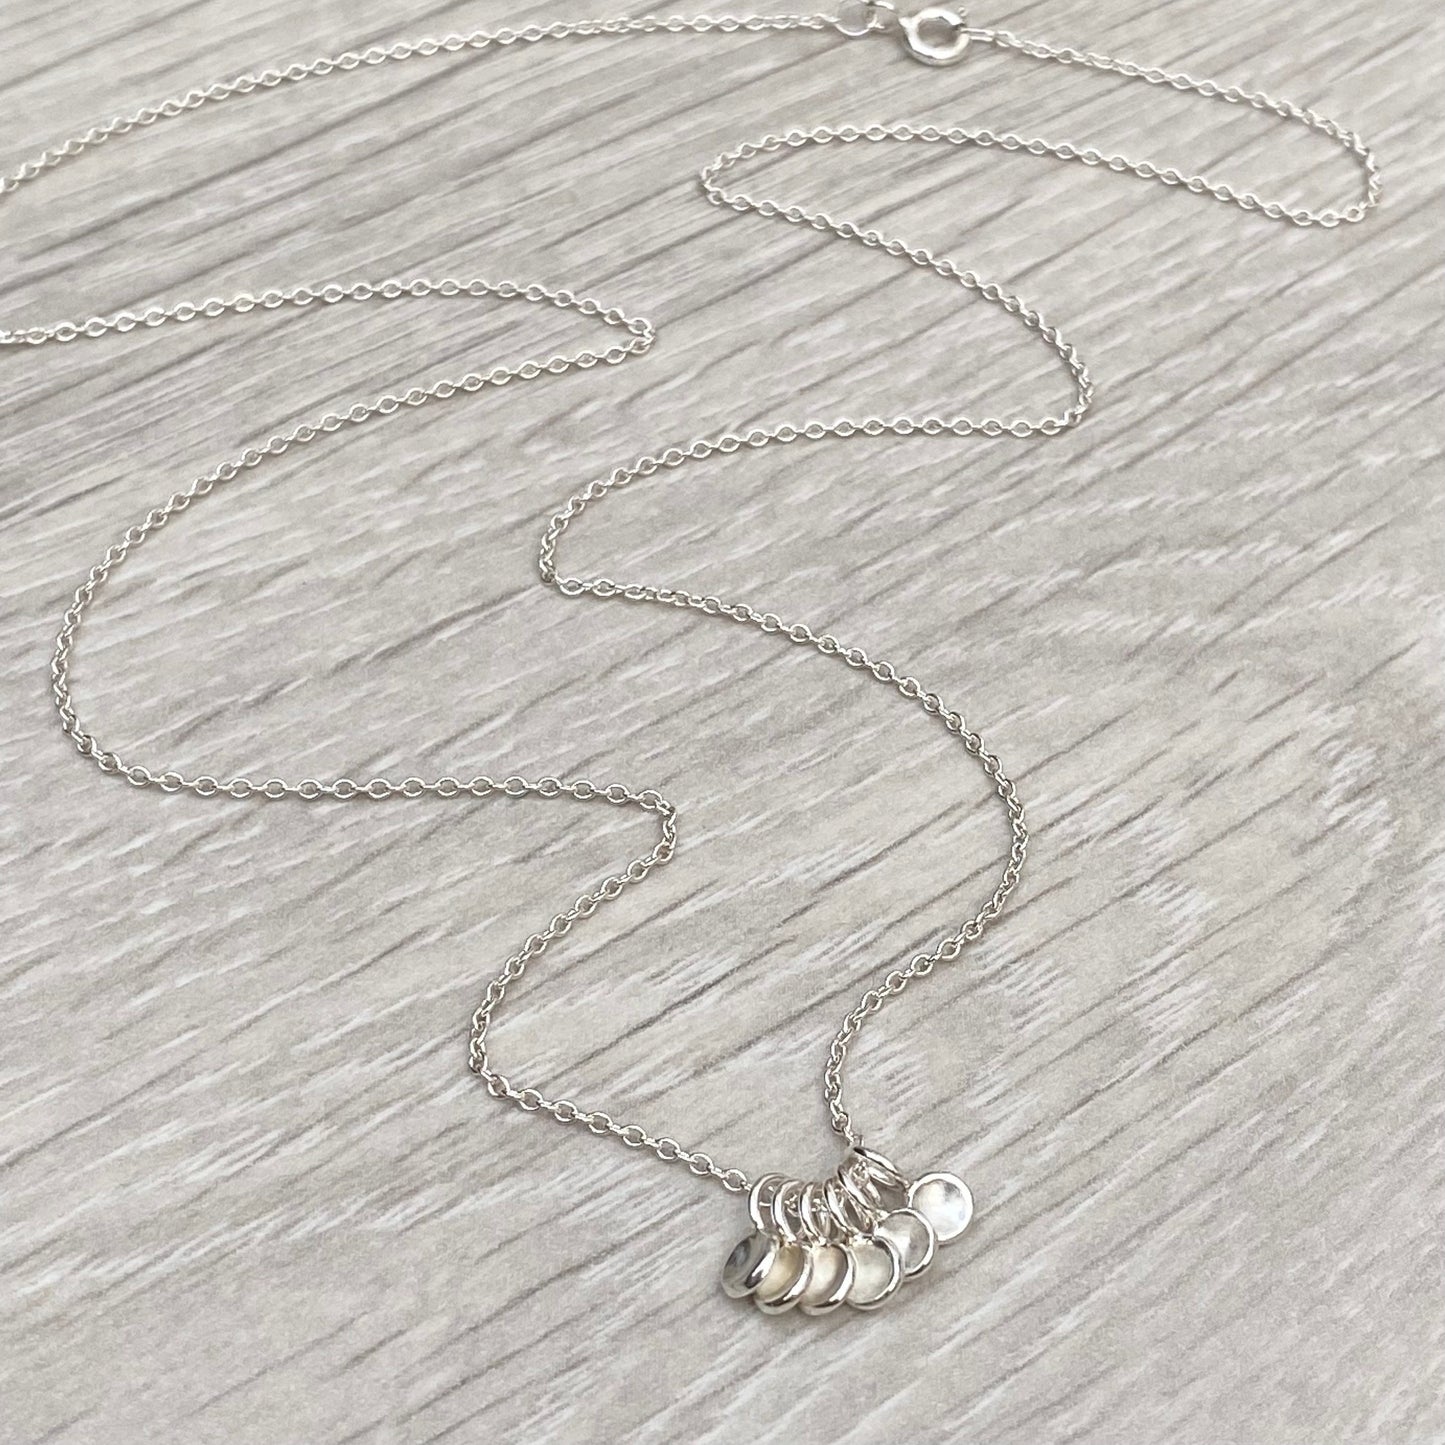 Handmade to order - Solid silver six tiny petal charm pendants on a 1.2mm wide trace chain